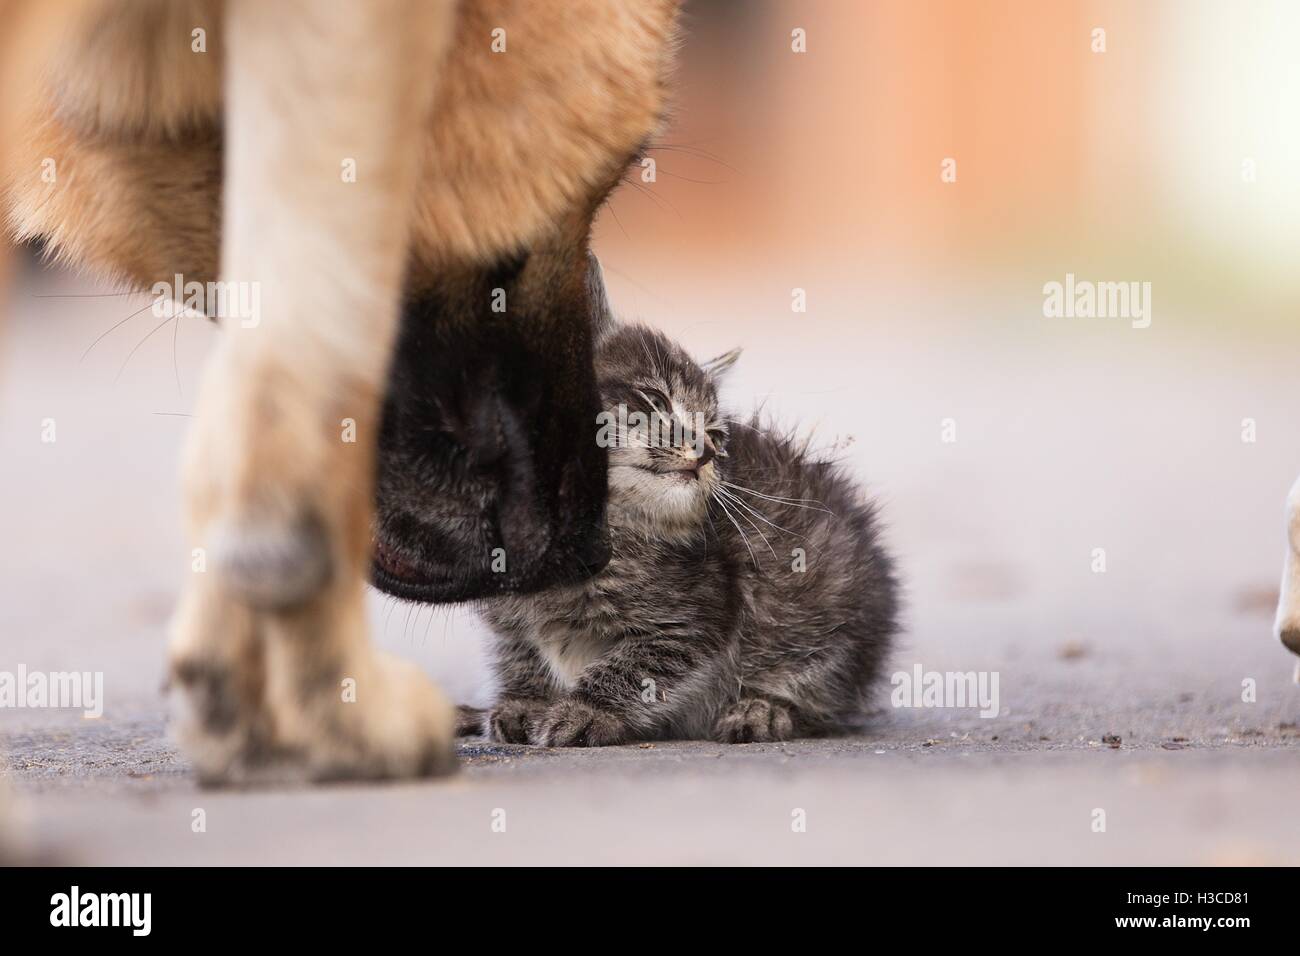 German shepherd taking care of young small cat Stock Photo